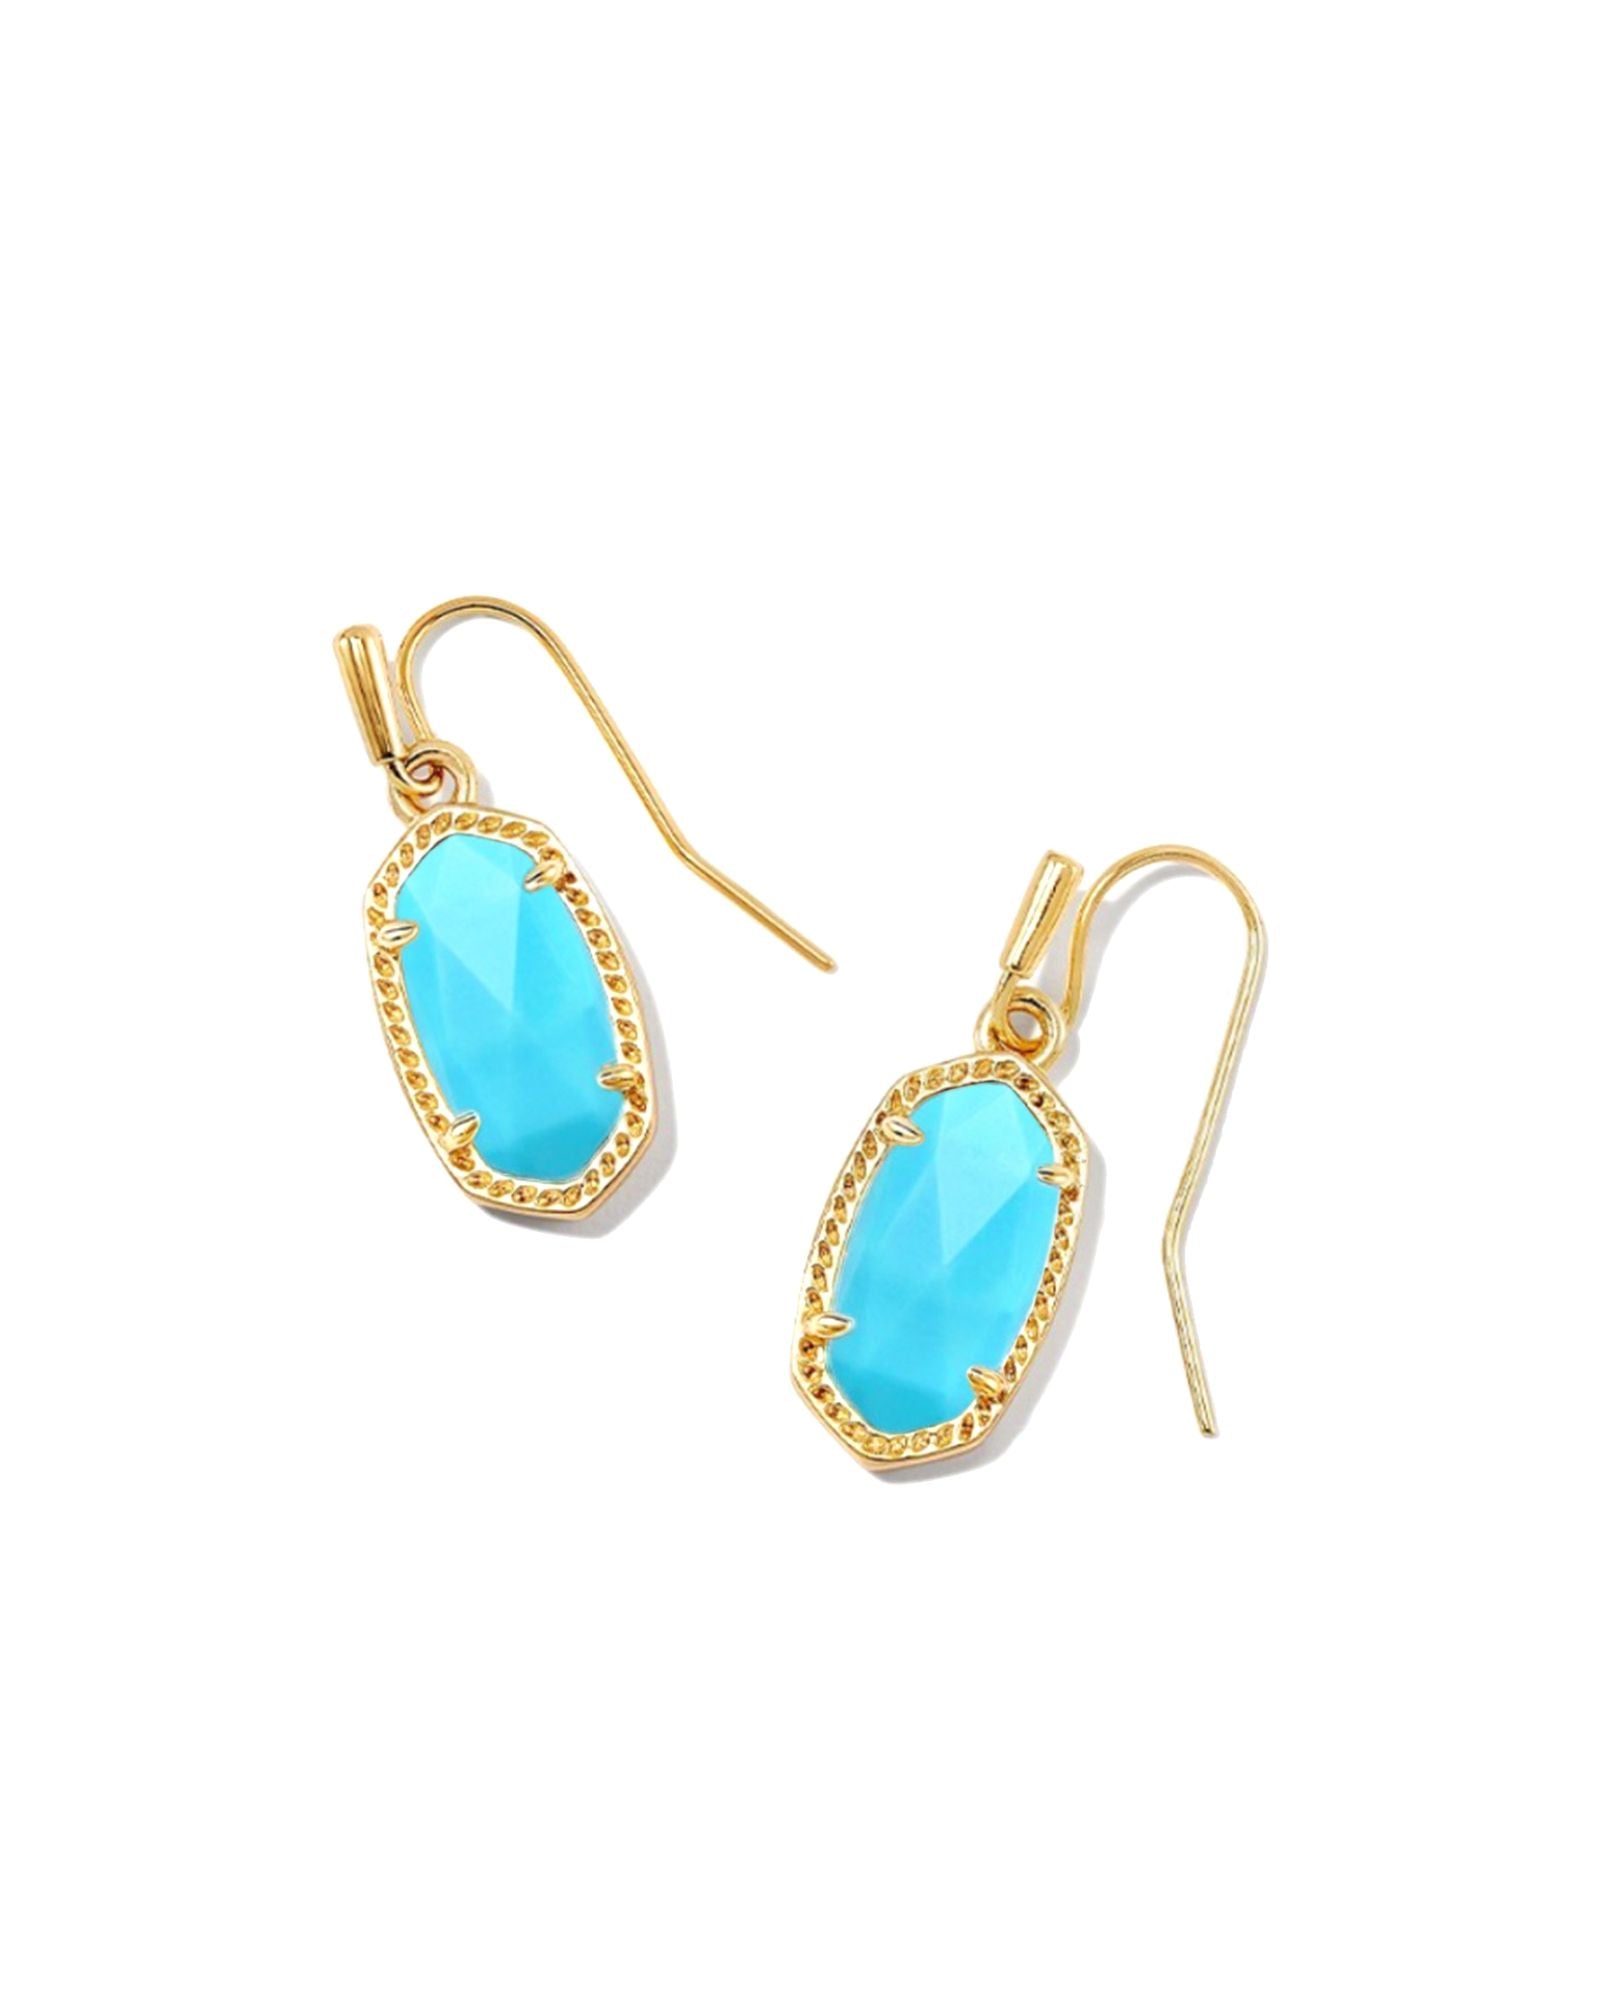 Lee Earring in Gold Turquoise Magnesite